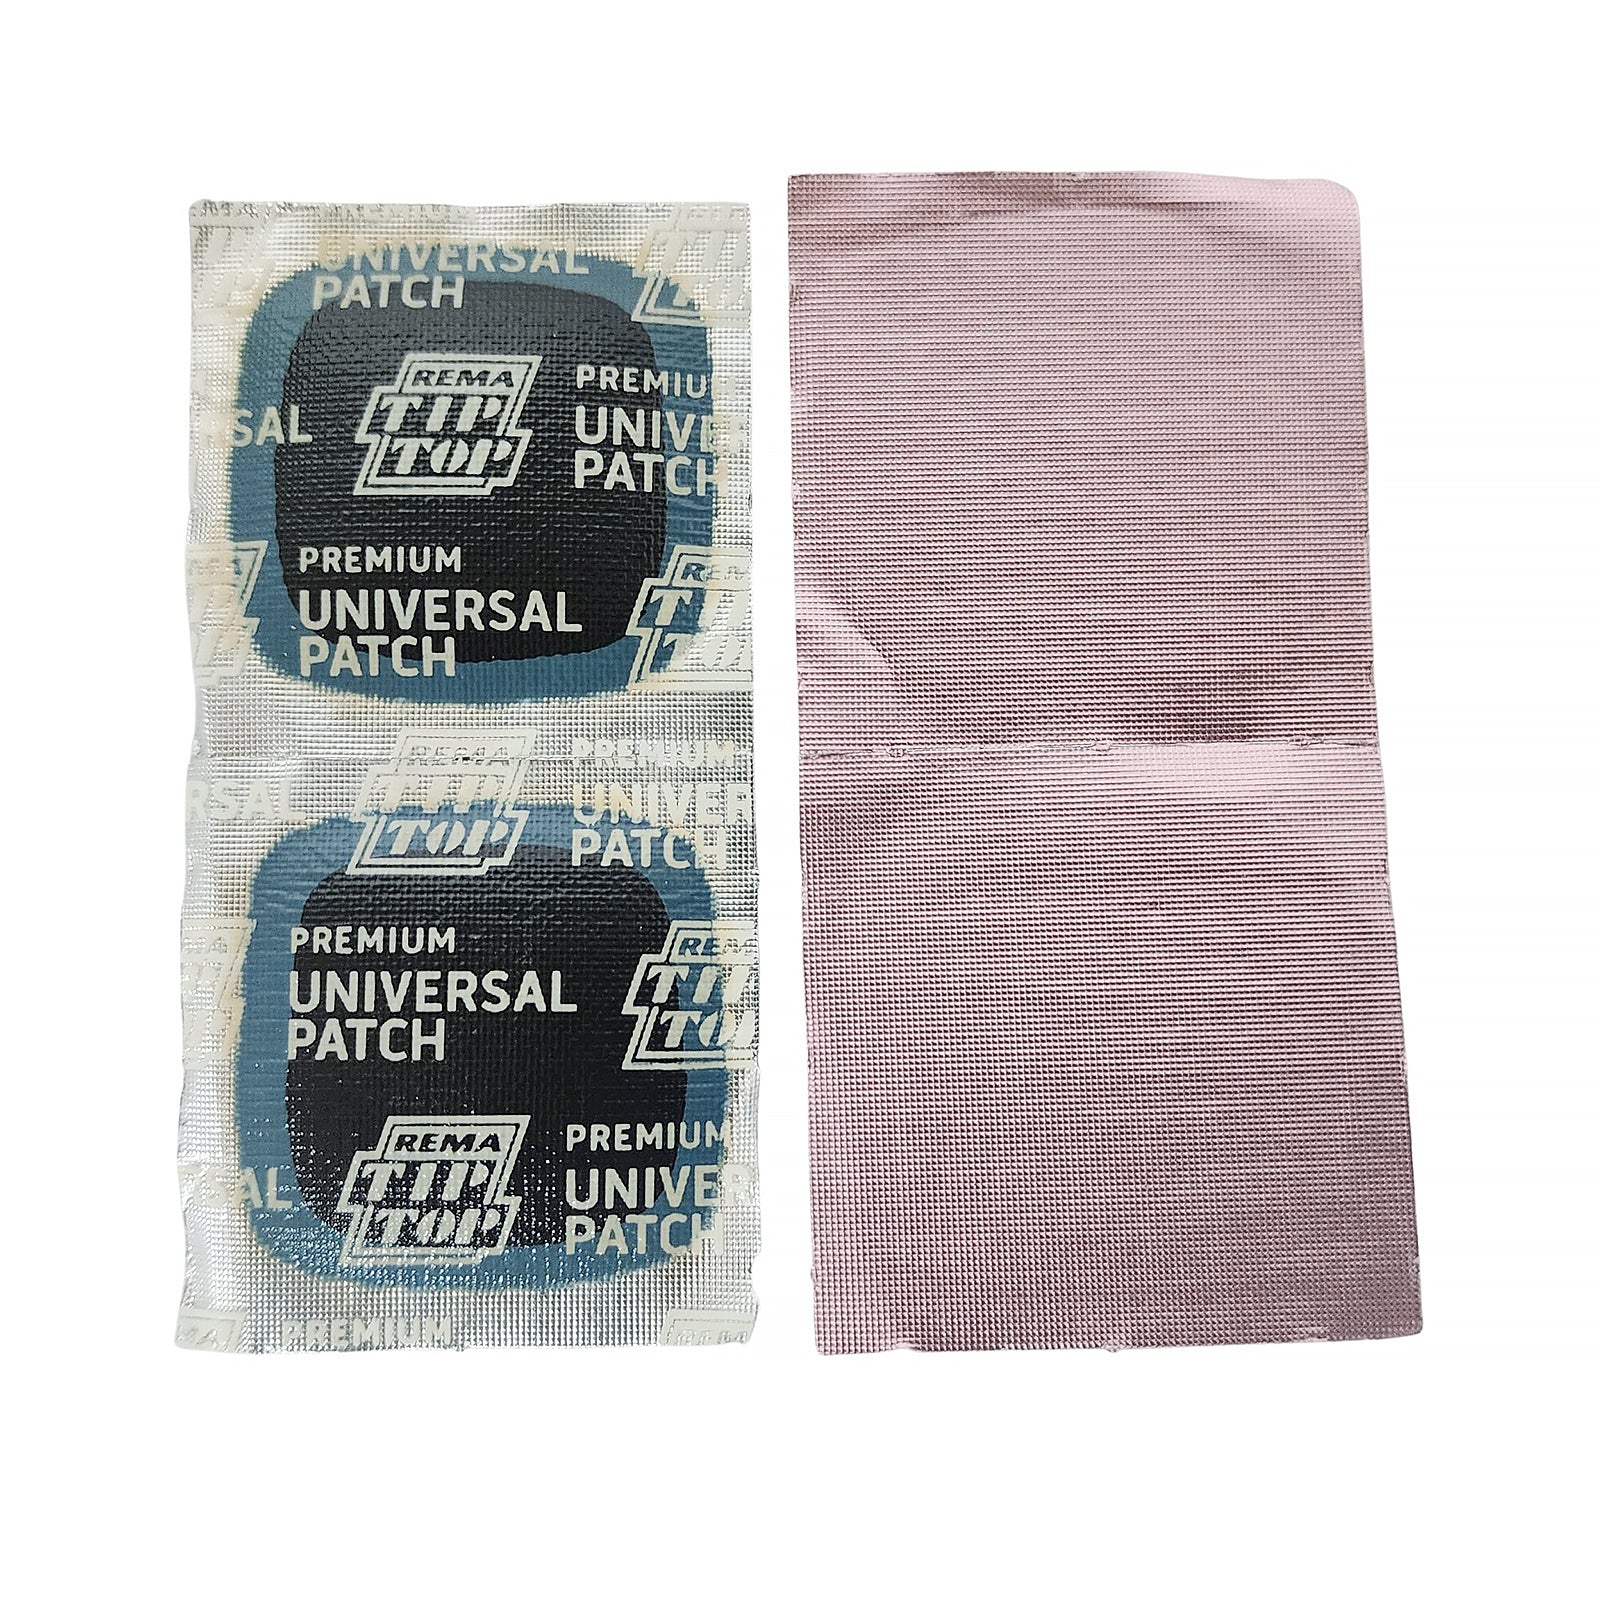 Rema UP-3 Universal Patch, 1" Square - 27mm (100 bx)